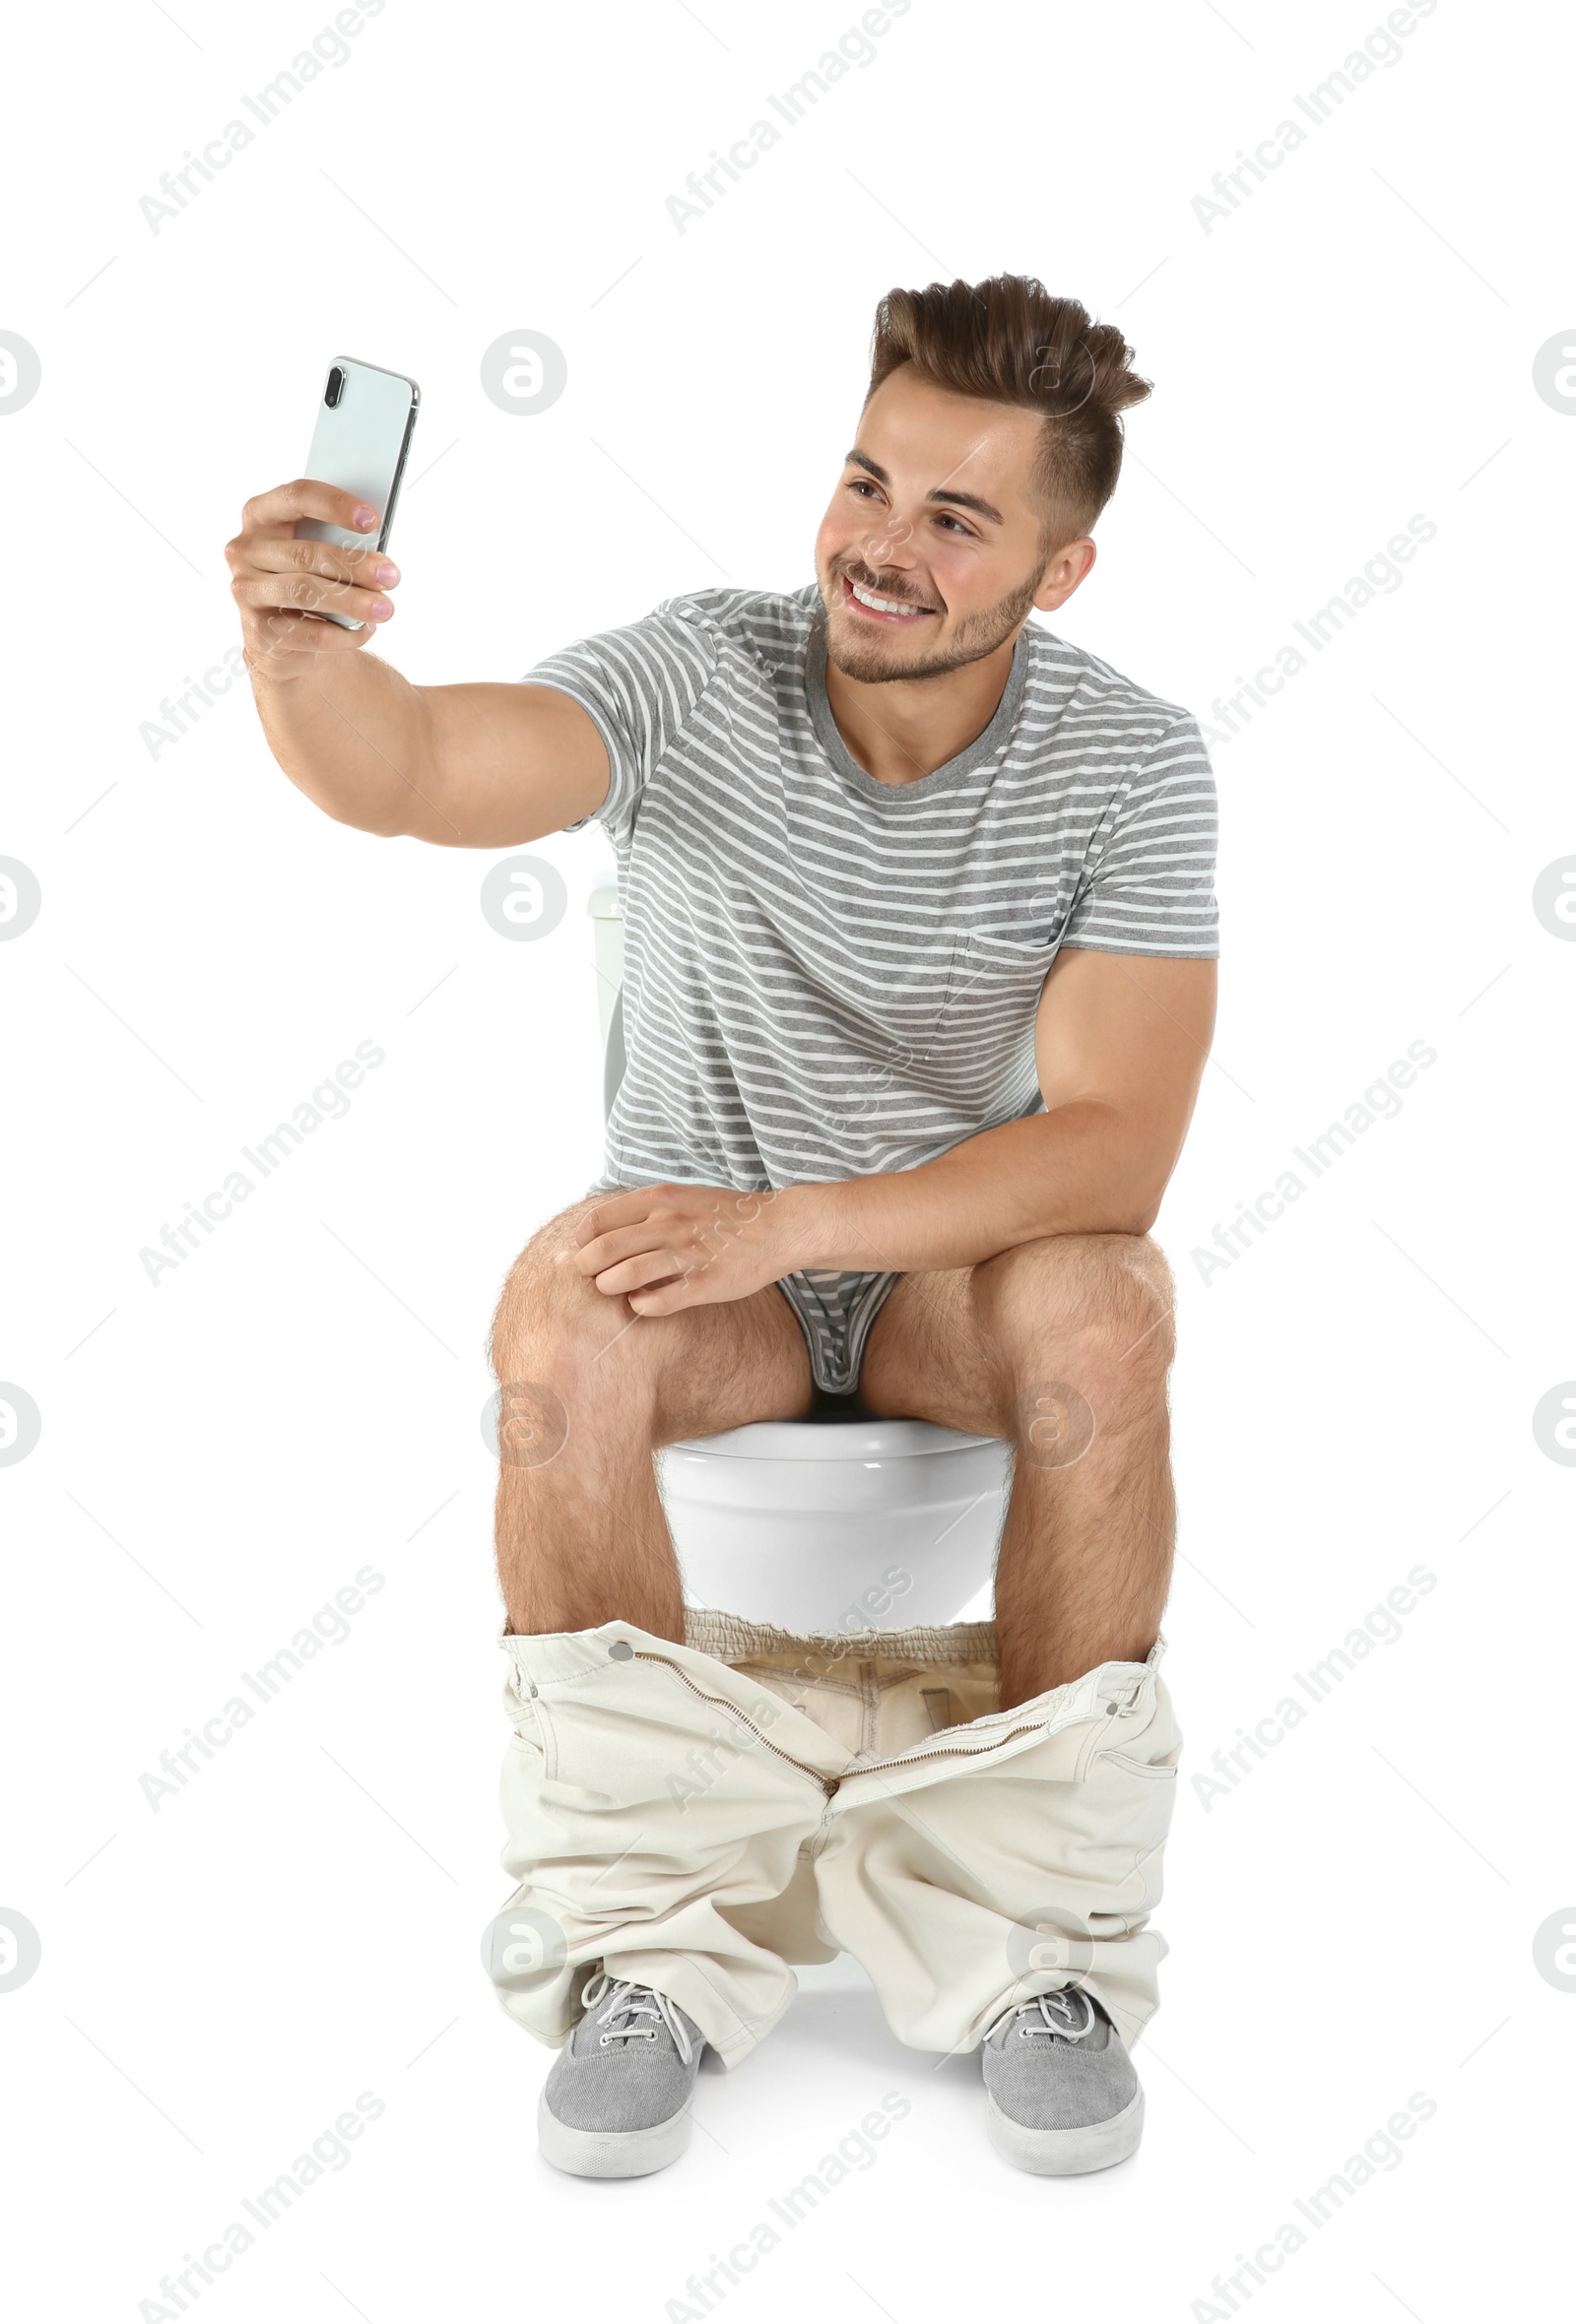 Photo of Young man taking selfie while sitting on toilet bowl. Isolated on white